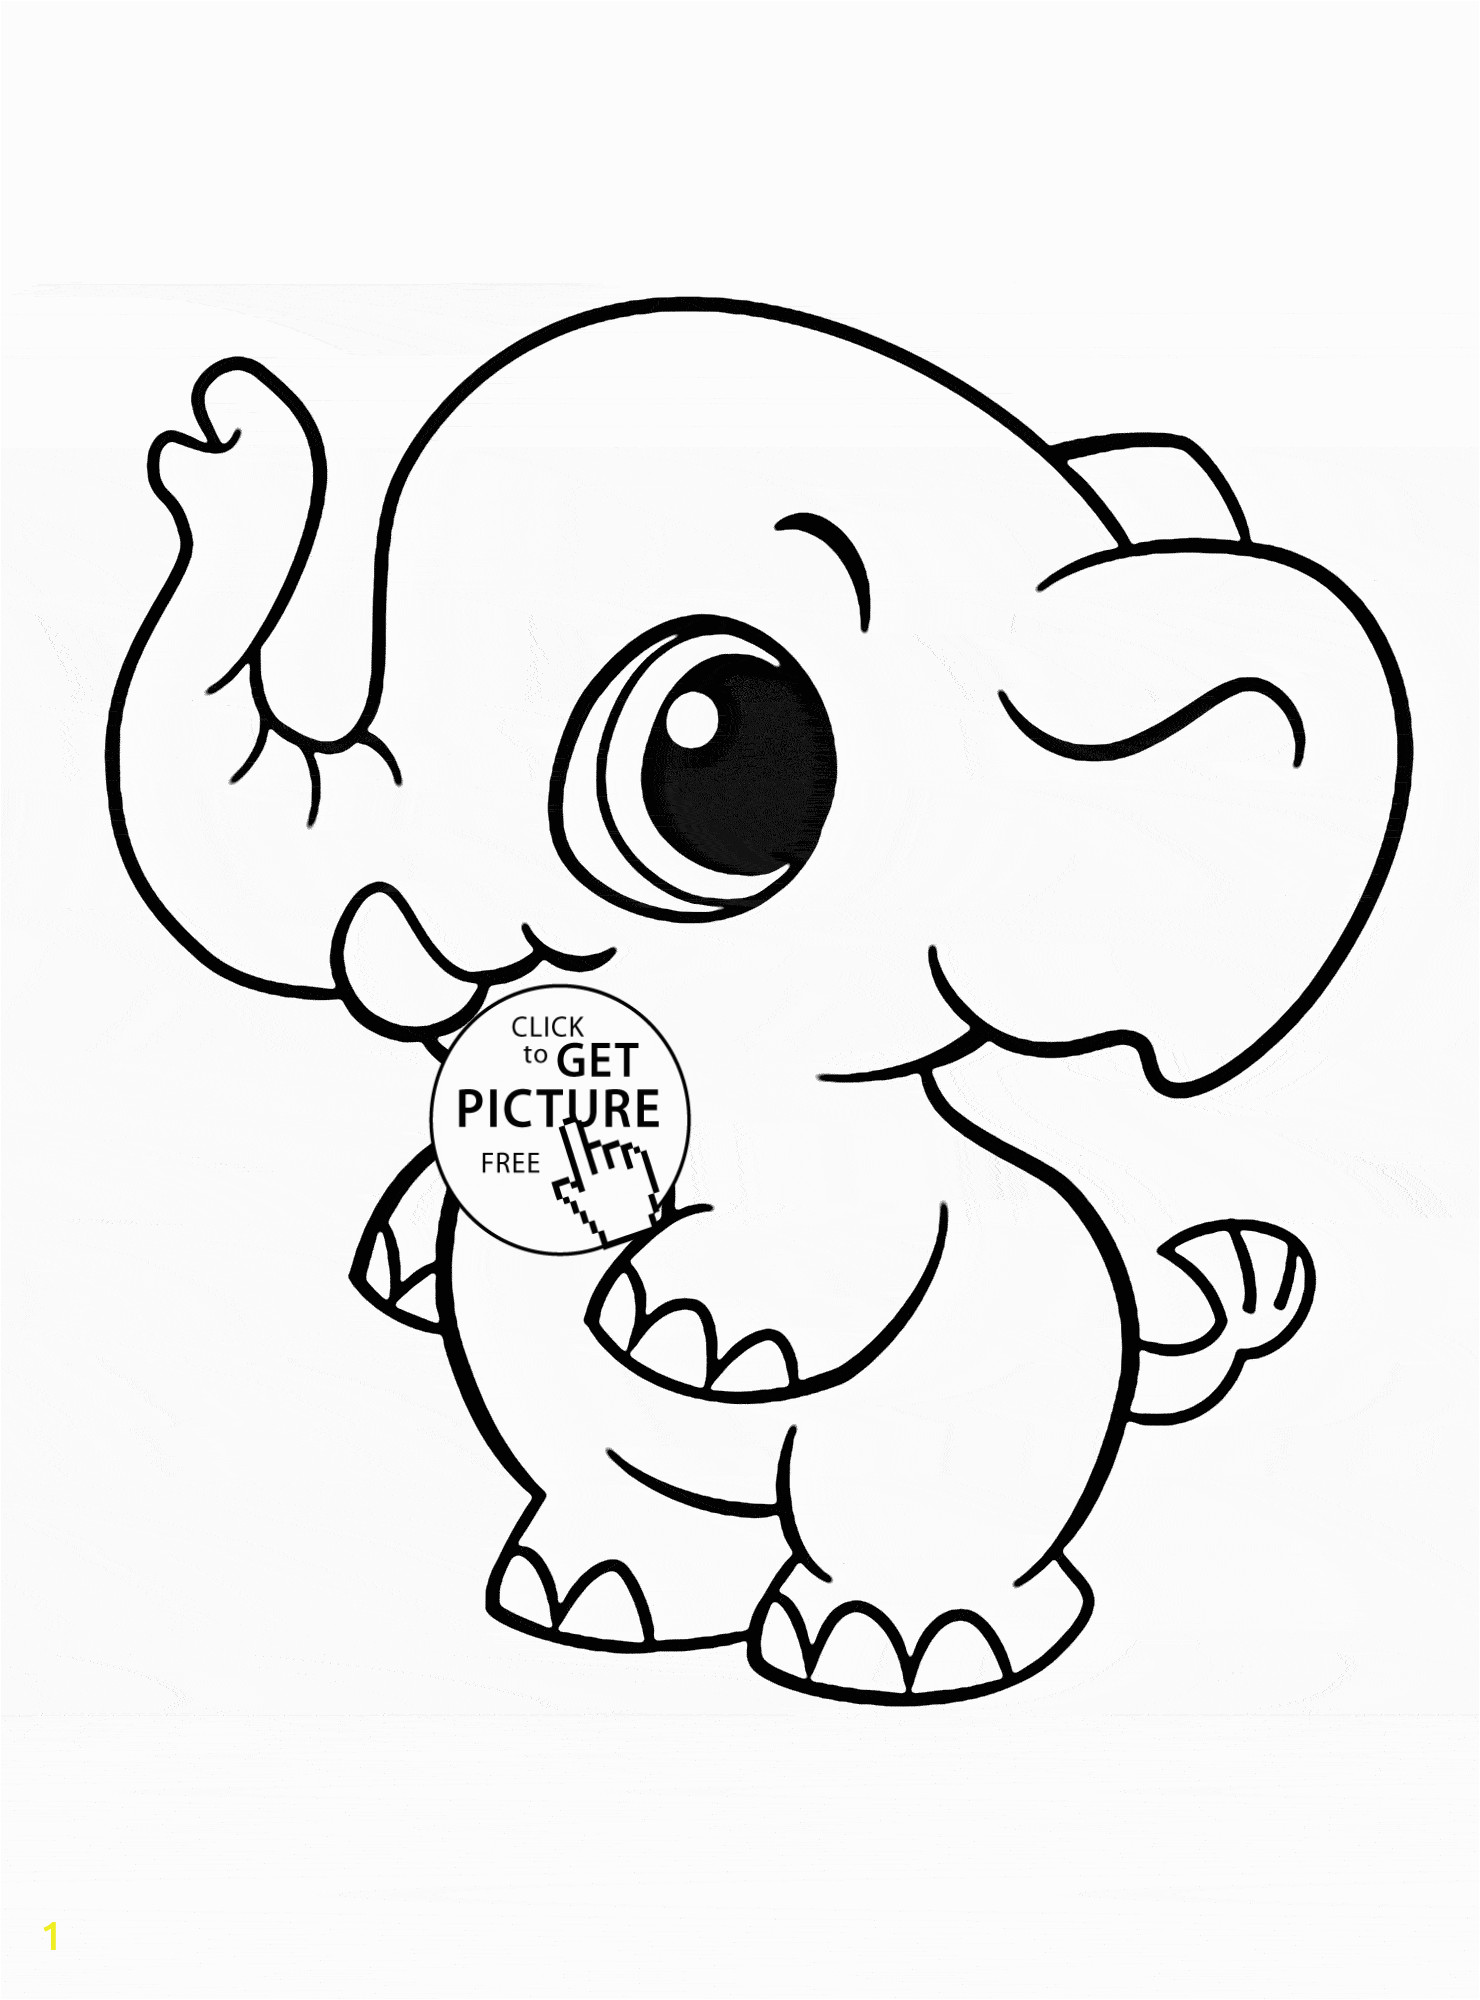 Zoo Animal Coloring Pages Printable Funny Animals Coloring Page Cute Dog Coloring Pages